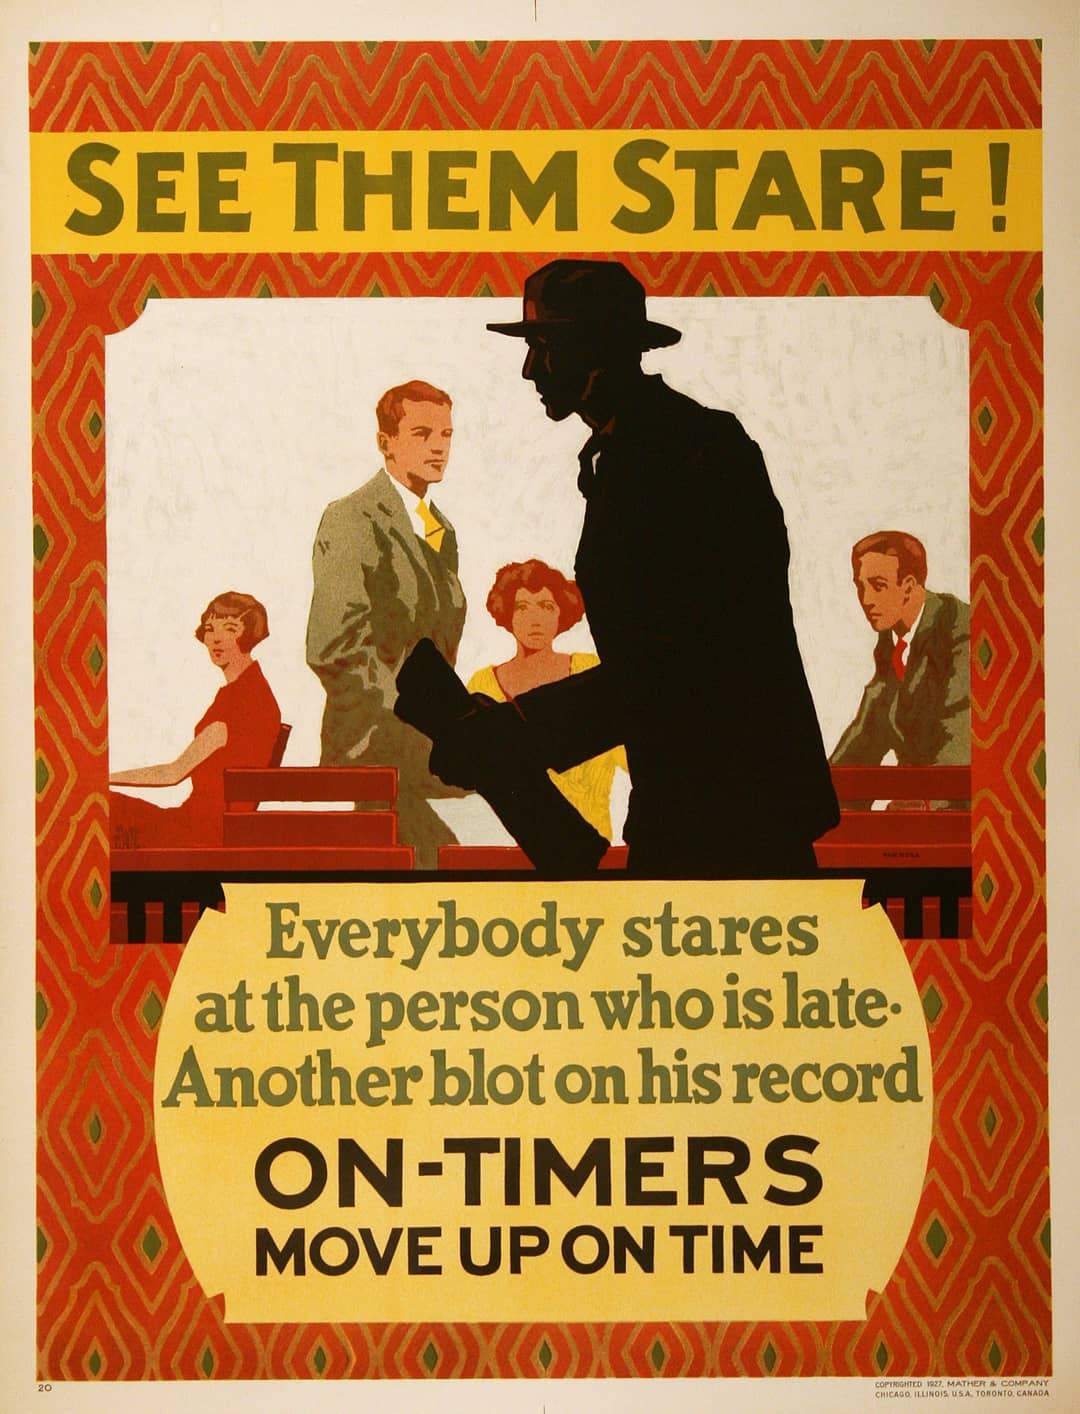 Original Mather Work Incentive Poster 1927 by Willard Frederick Elmes - See Them Stare